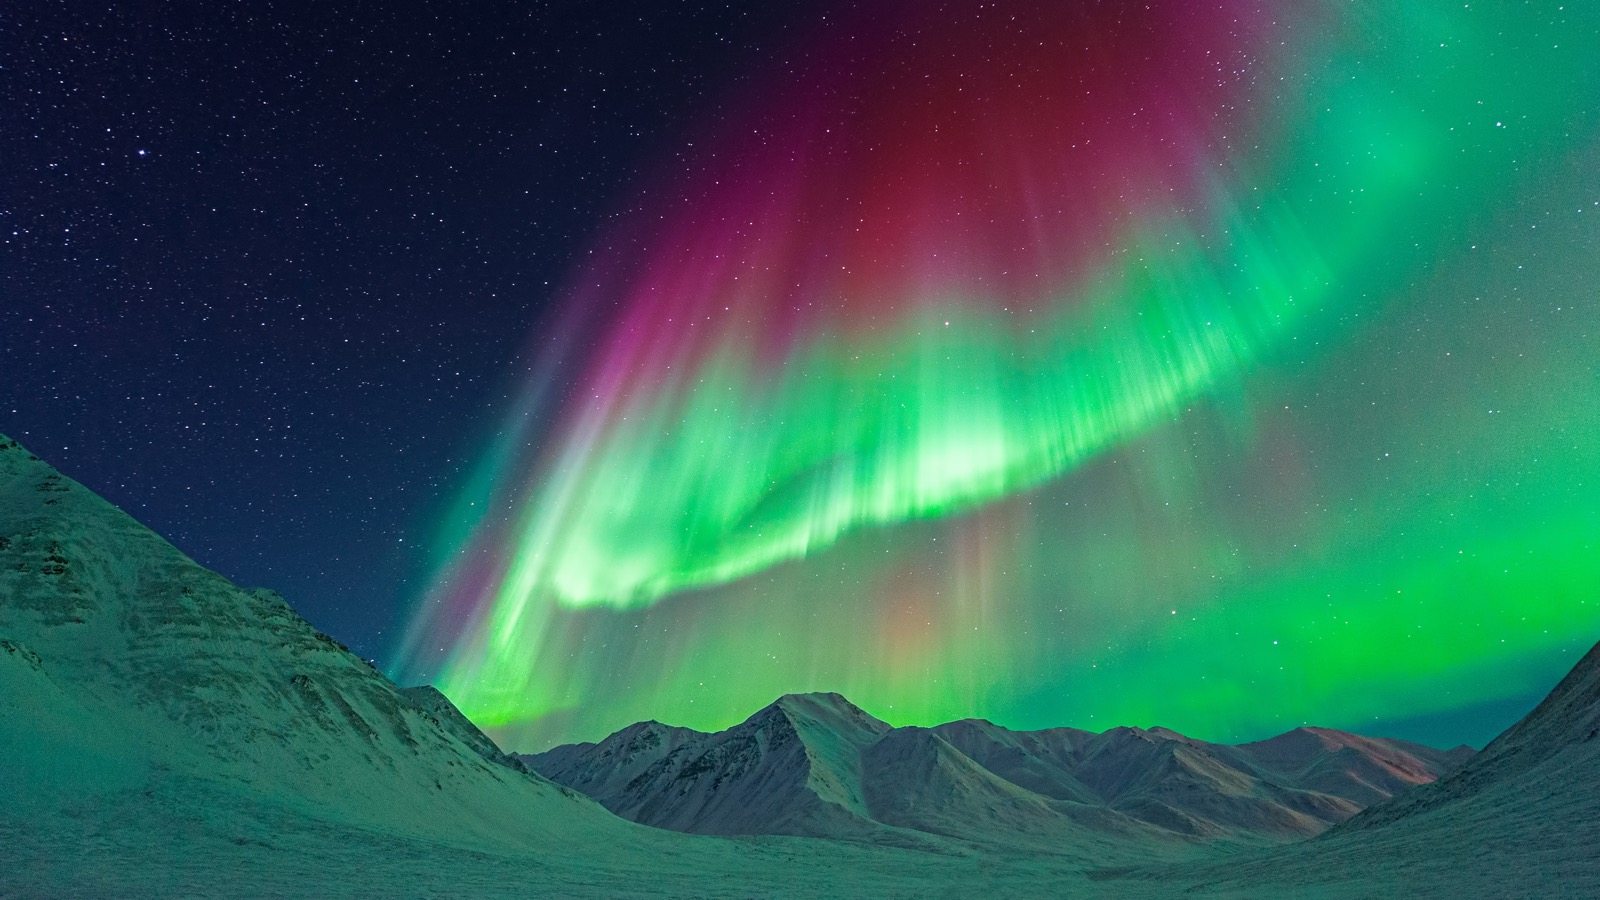 Splurge Your Entire Savings ✈️ Traveling the World to Find Out How Many Years You Have Left Aurora Borealis - Alaska, USA